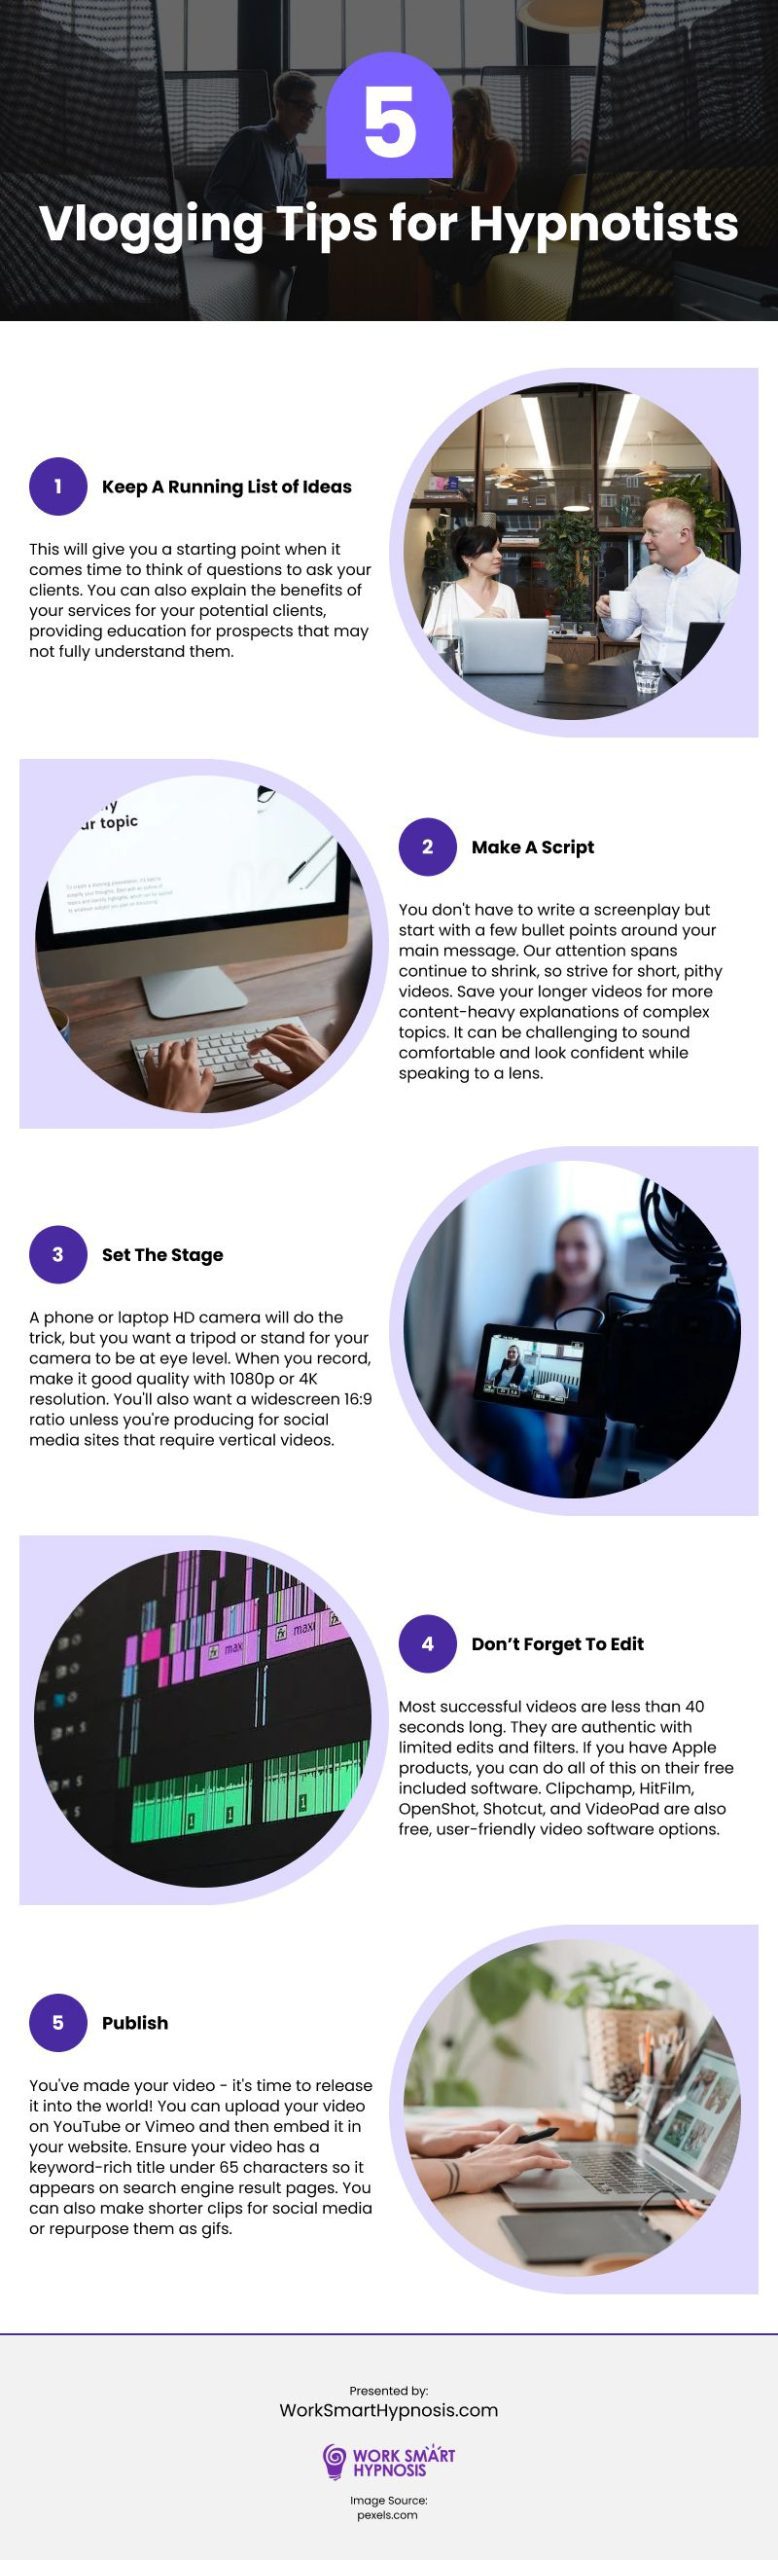 5 Vlogging Tips for Hypnotists Infographic